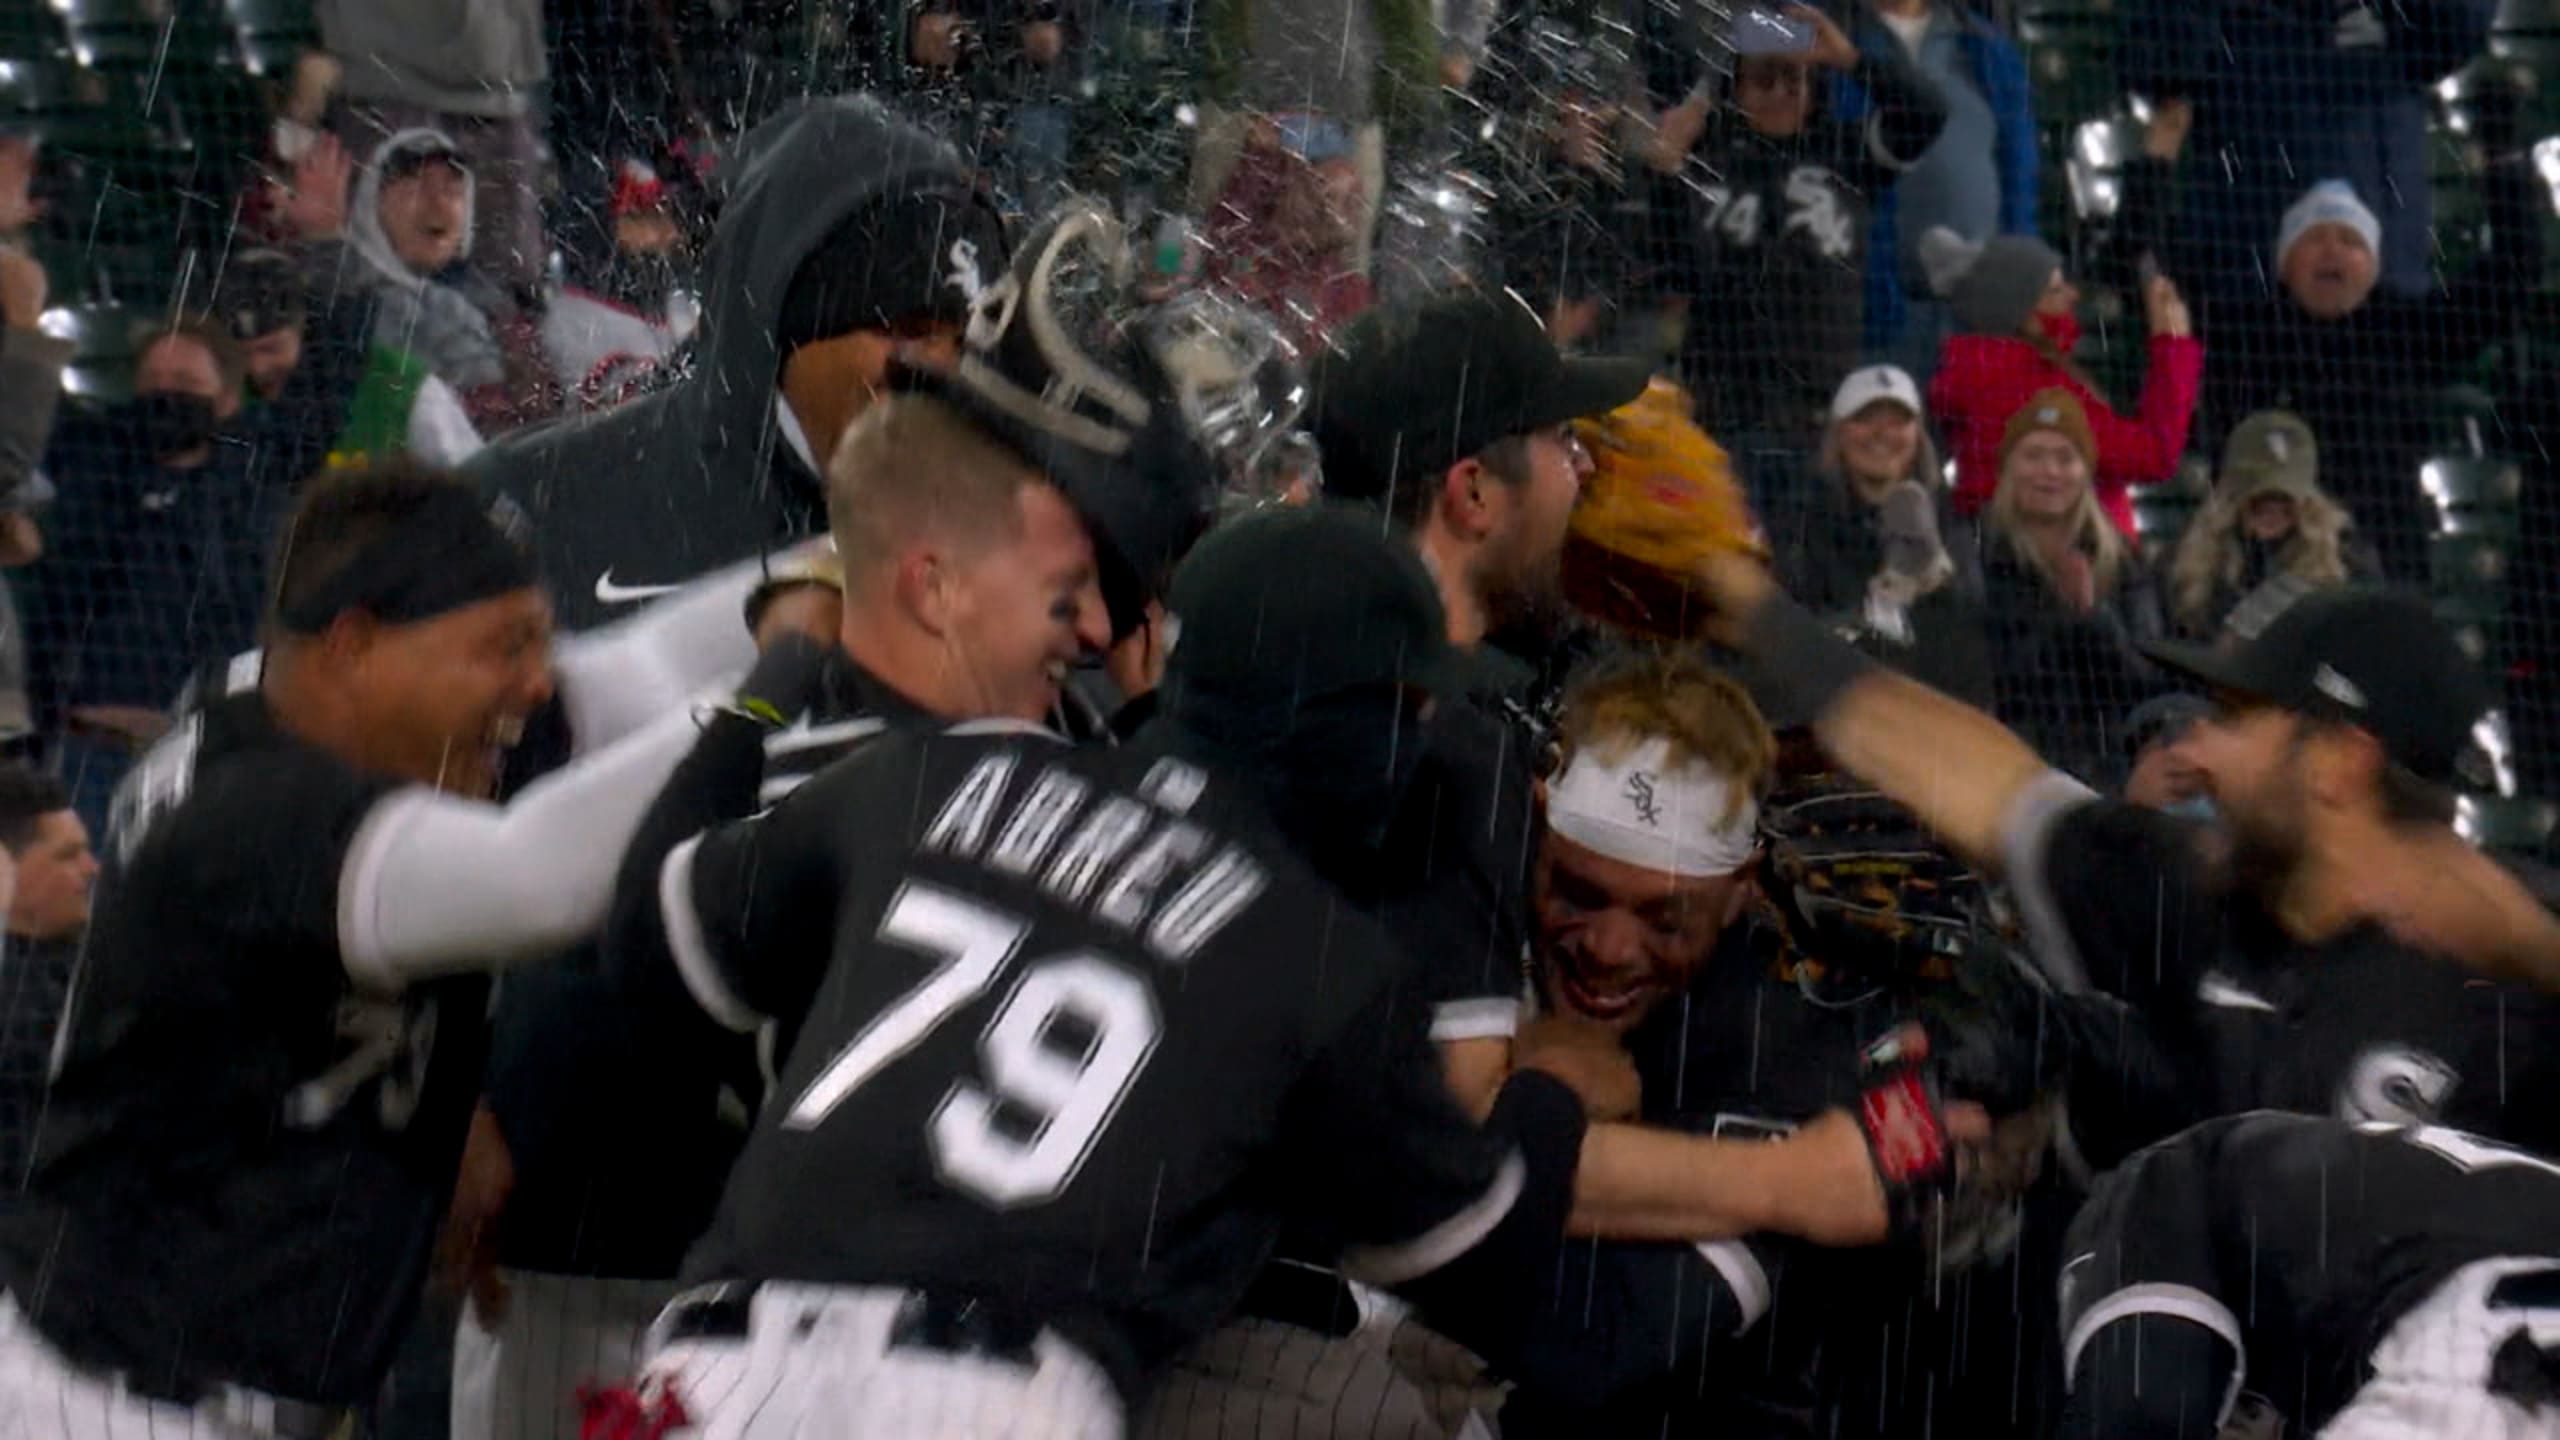 Leury García wins it for White Sox with 9th inning RBI – NBC